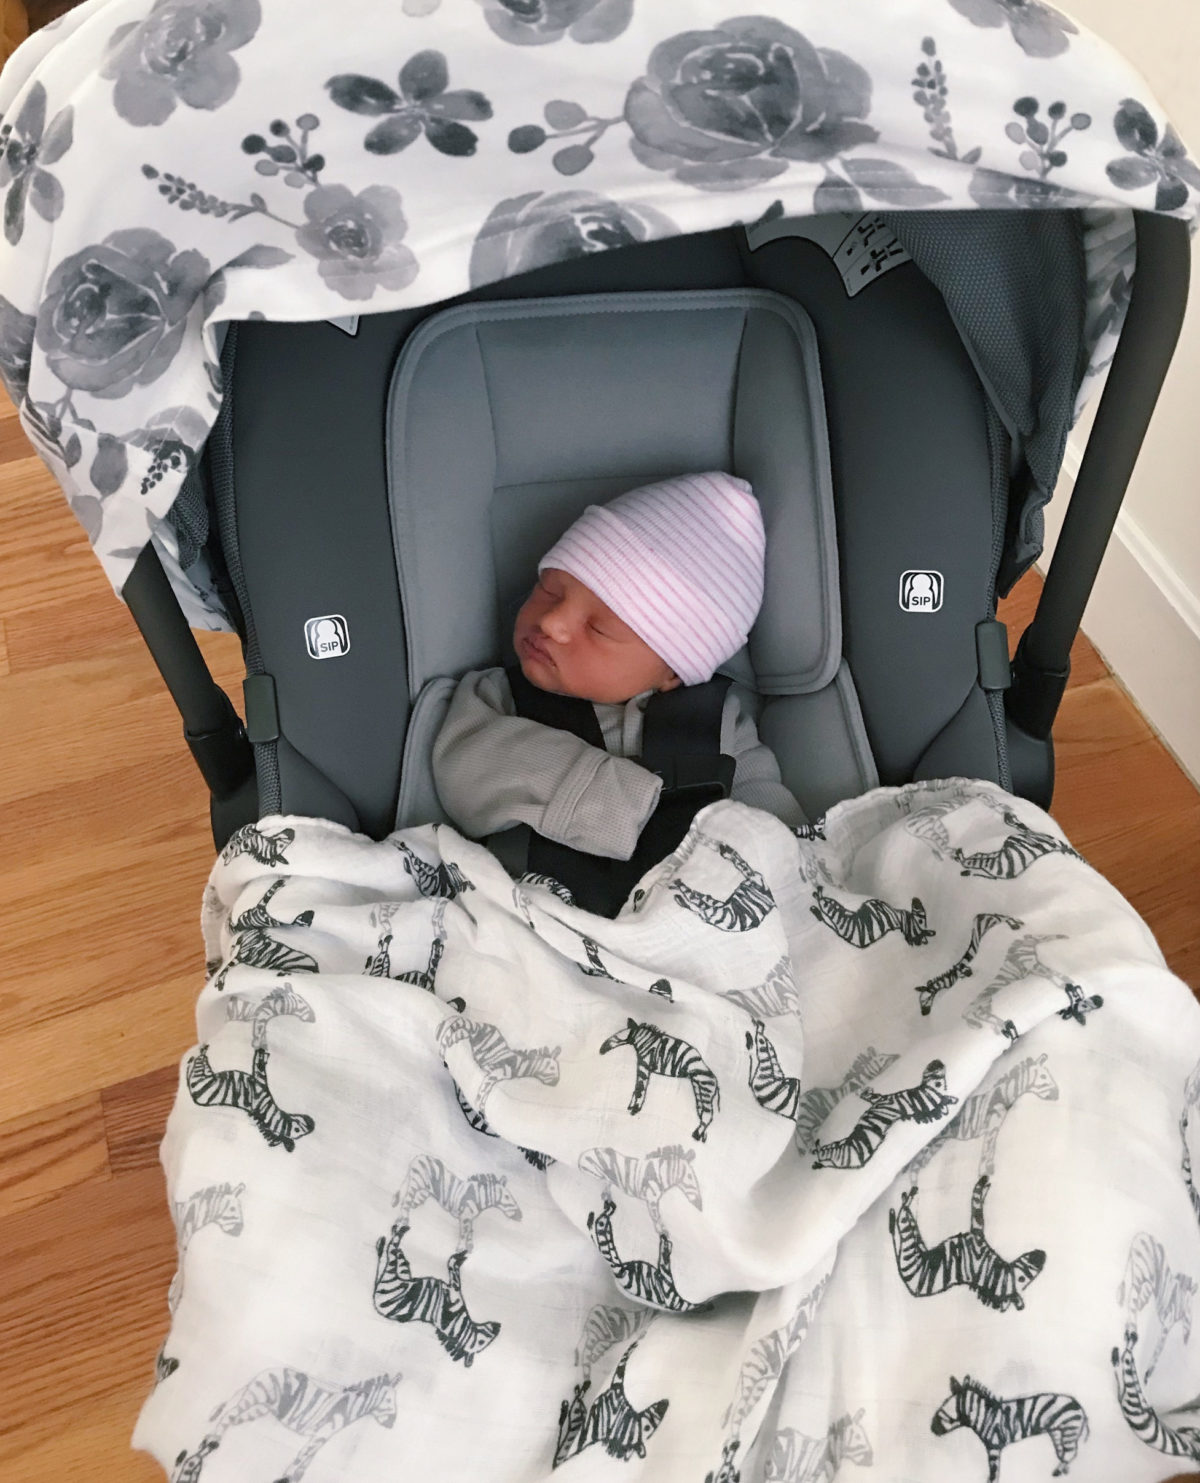 nuna pipa carseat coming home outfit newborn baby